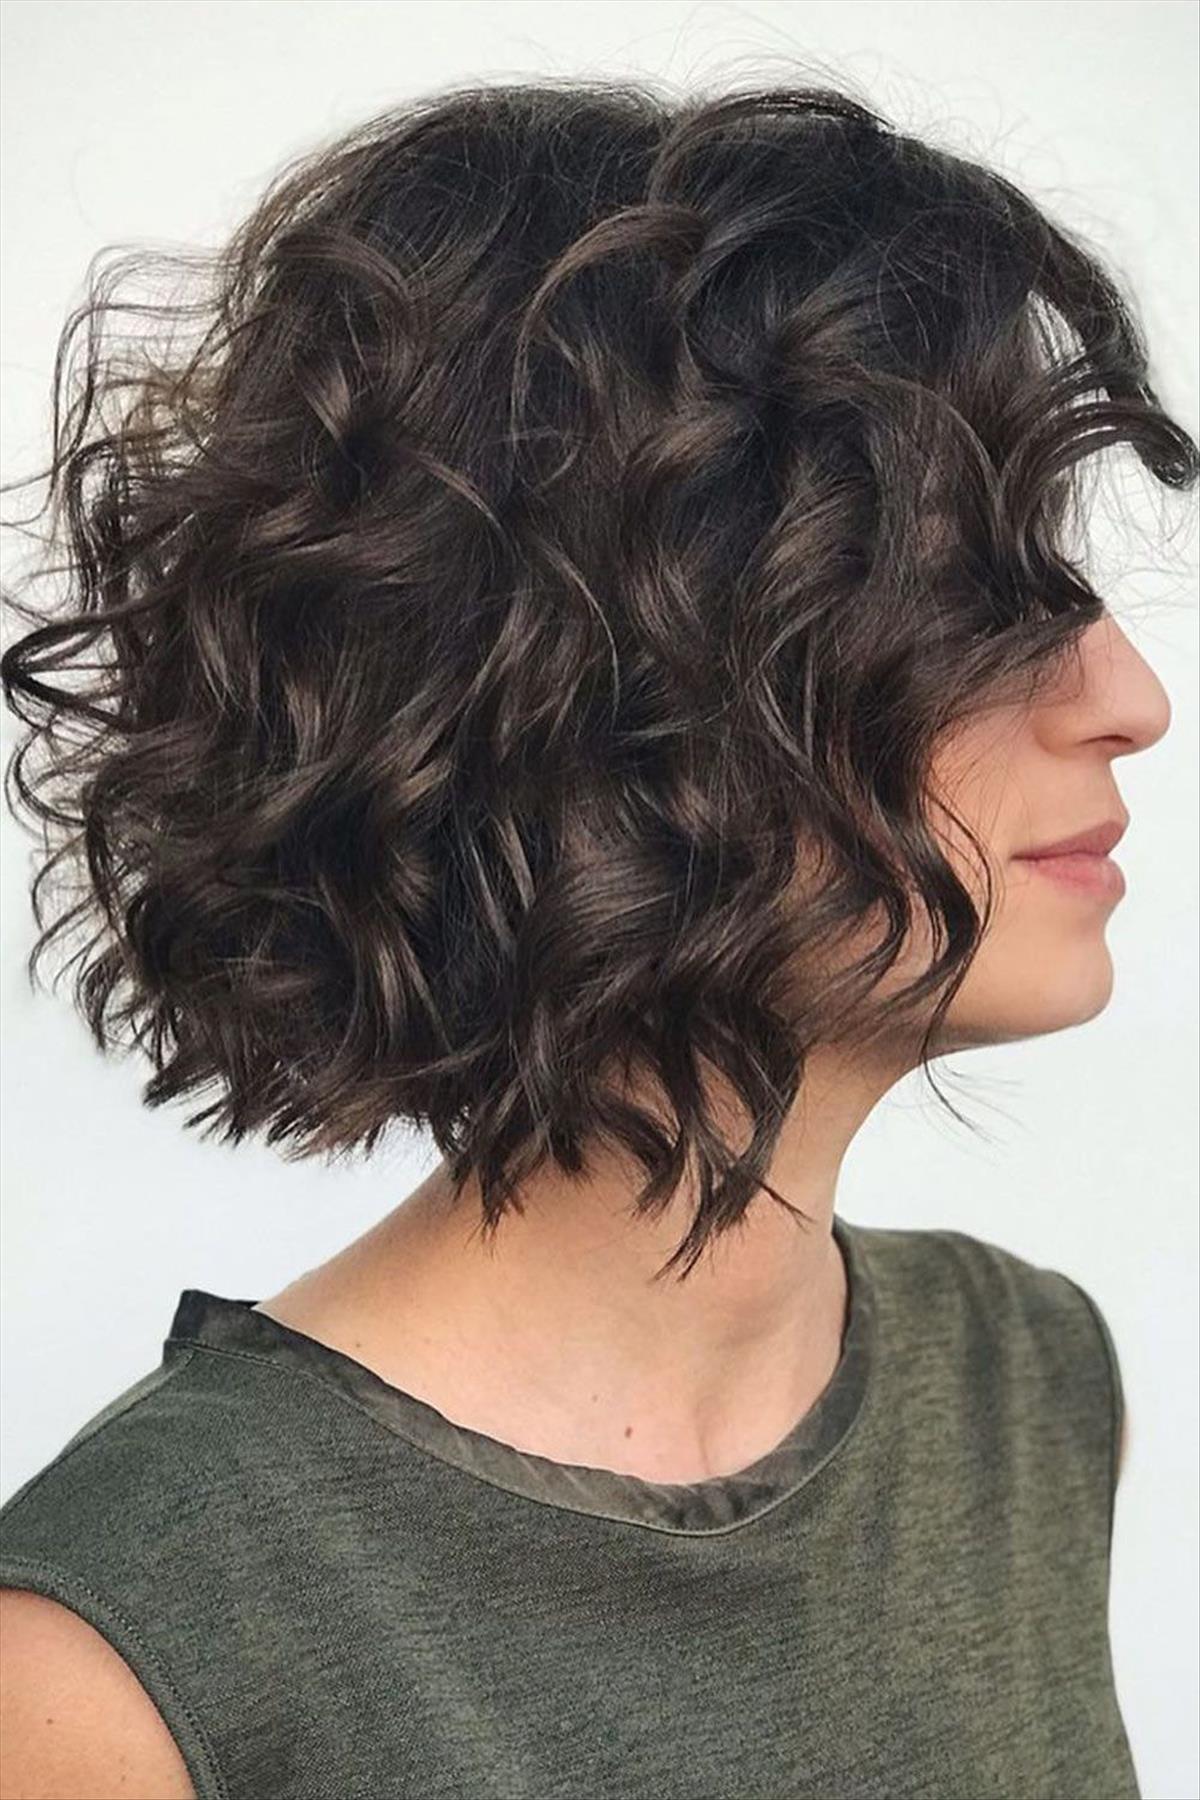 Easy Short Natural Curly Hairstyles for Women